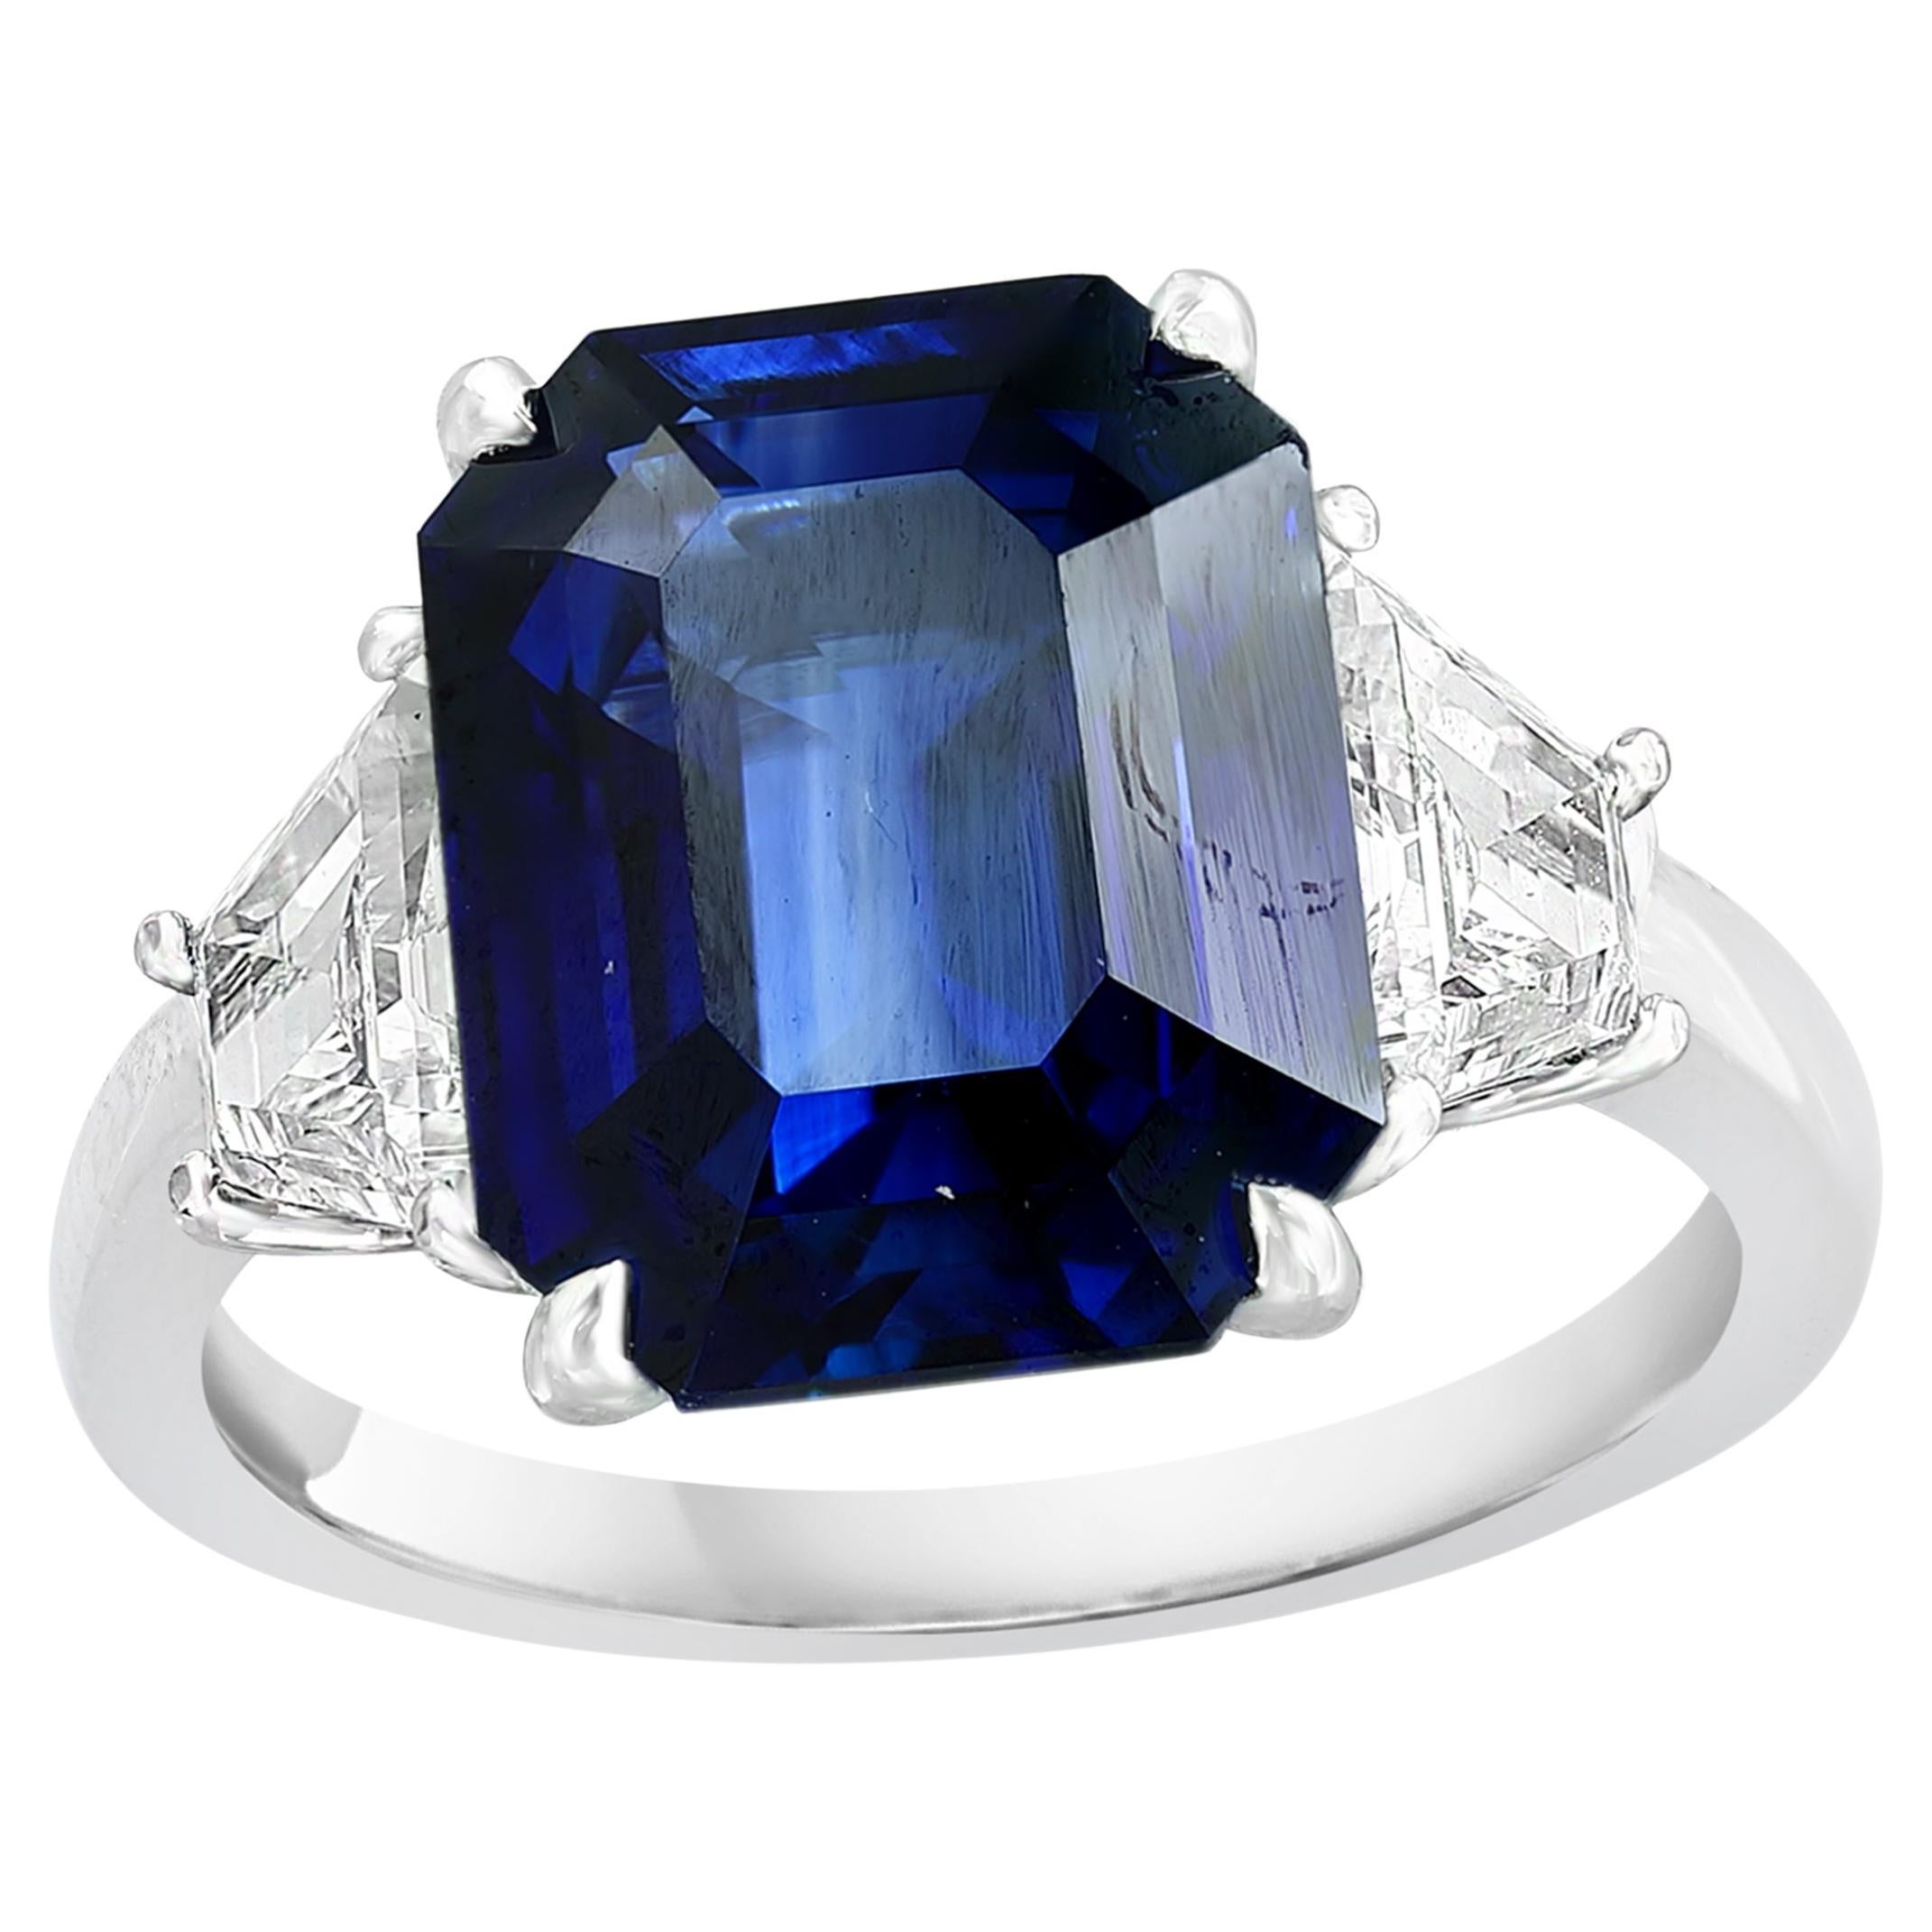 GIA Certified 6.10 Carat Emerald Cut Sapphire Engagement Ring in Platinum For Sale